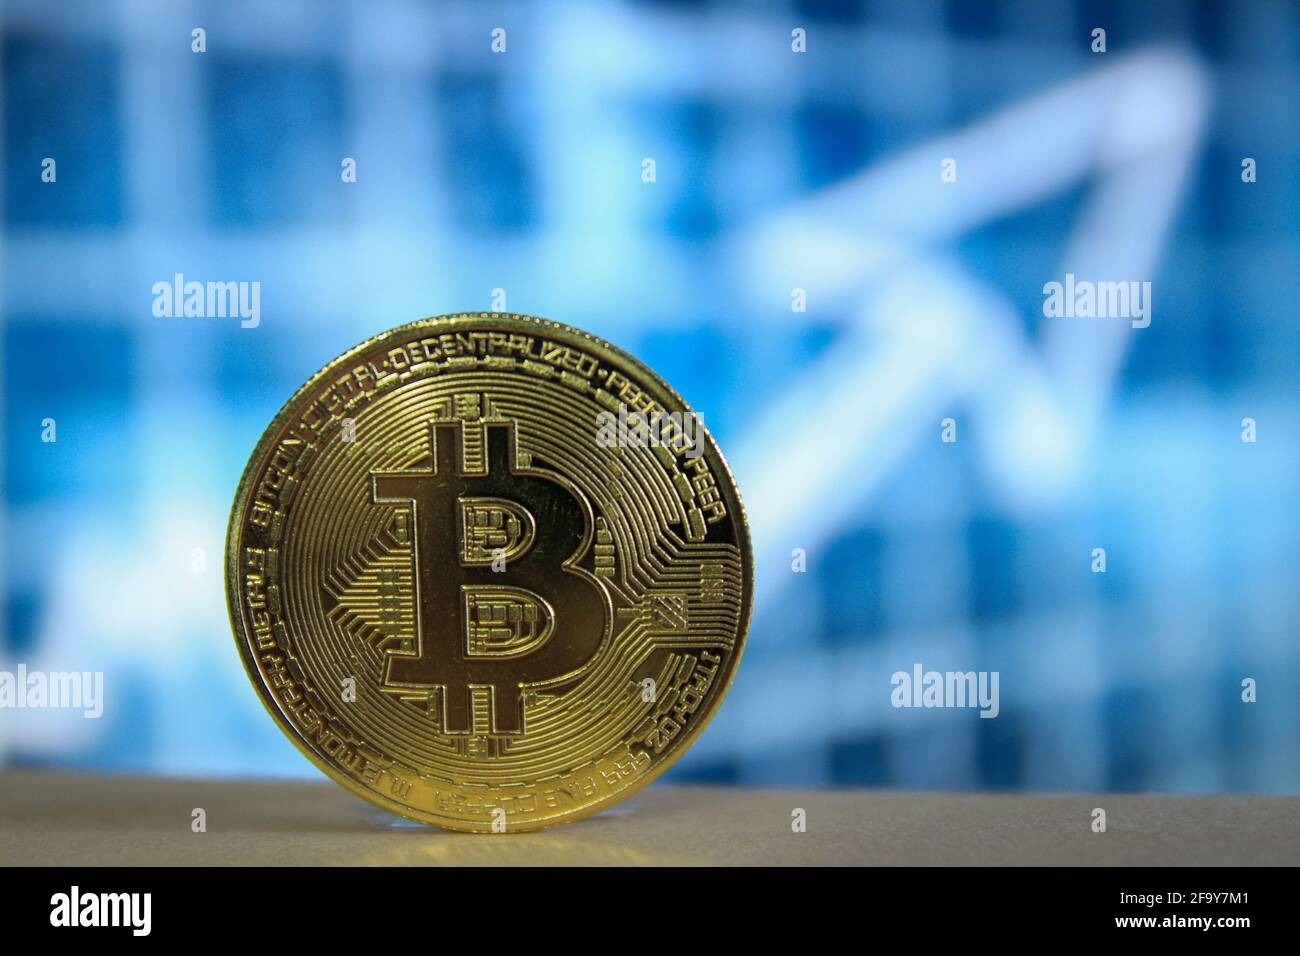 A physical version of Bitcoin BTC with blurred blue background and an arrow. Stock Photo